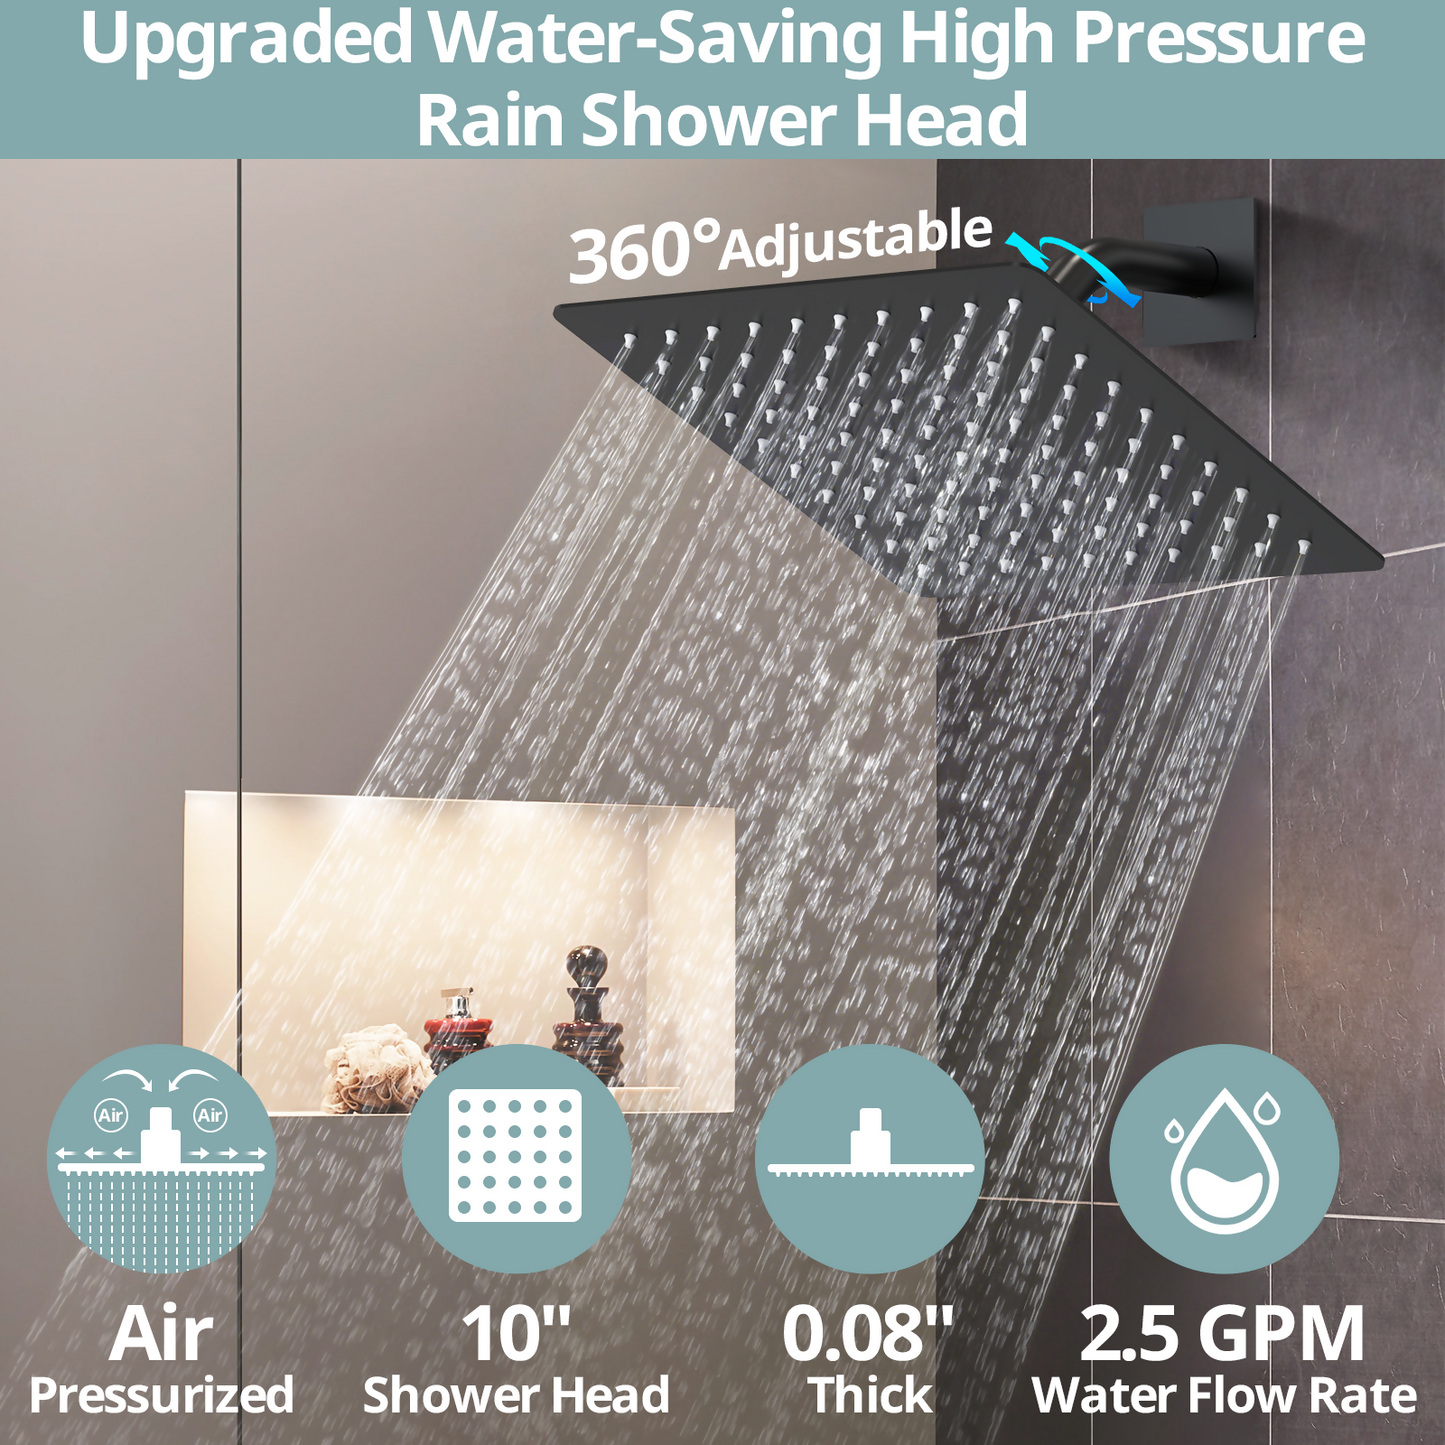 RelaxaJet 8" High-Pressure Rainfall Shower Faucet with Handheld Spray, Wall Mount, Rough in-Valve